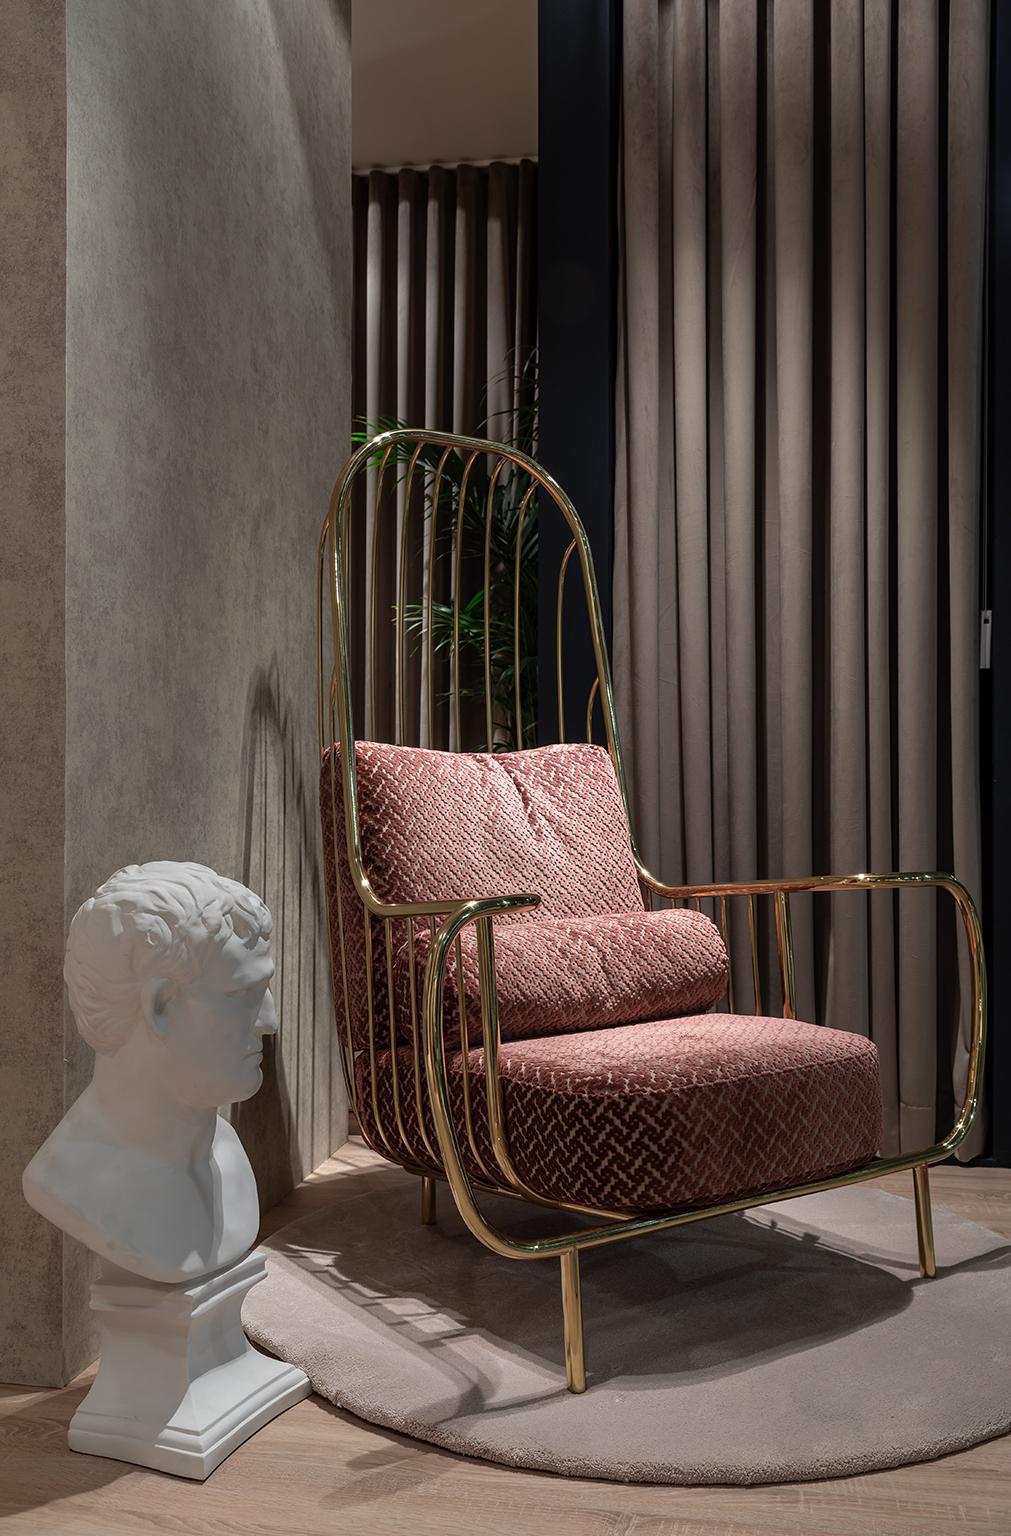 Inspiration:  
The sculptural forms of the 30s inspired the Liberty Collection. The tubular and steel structures that have marked those years are combined with a new inspiration that emphasizes the antagonistic feeling of deprivation of liberty.